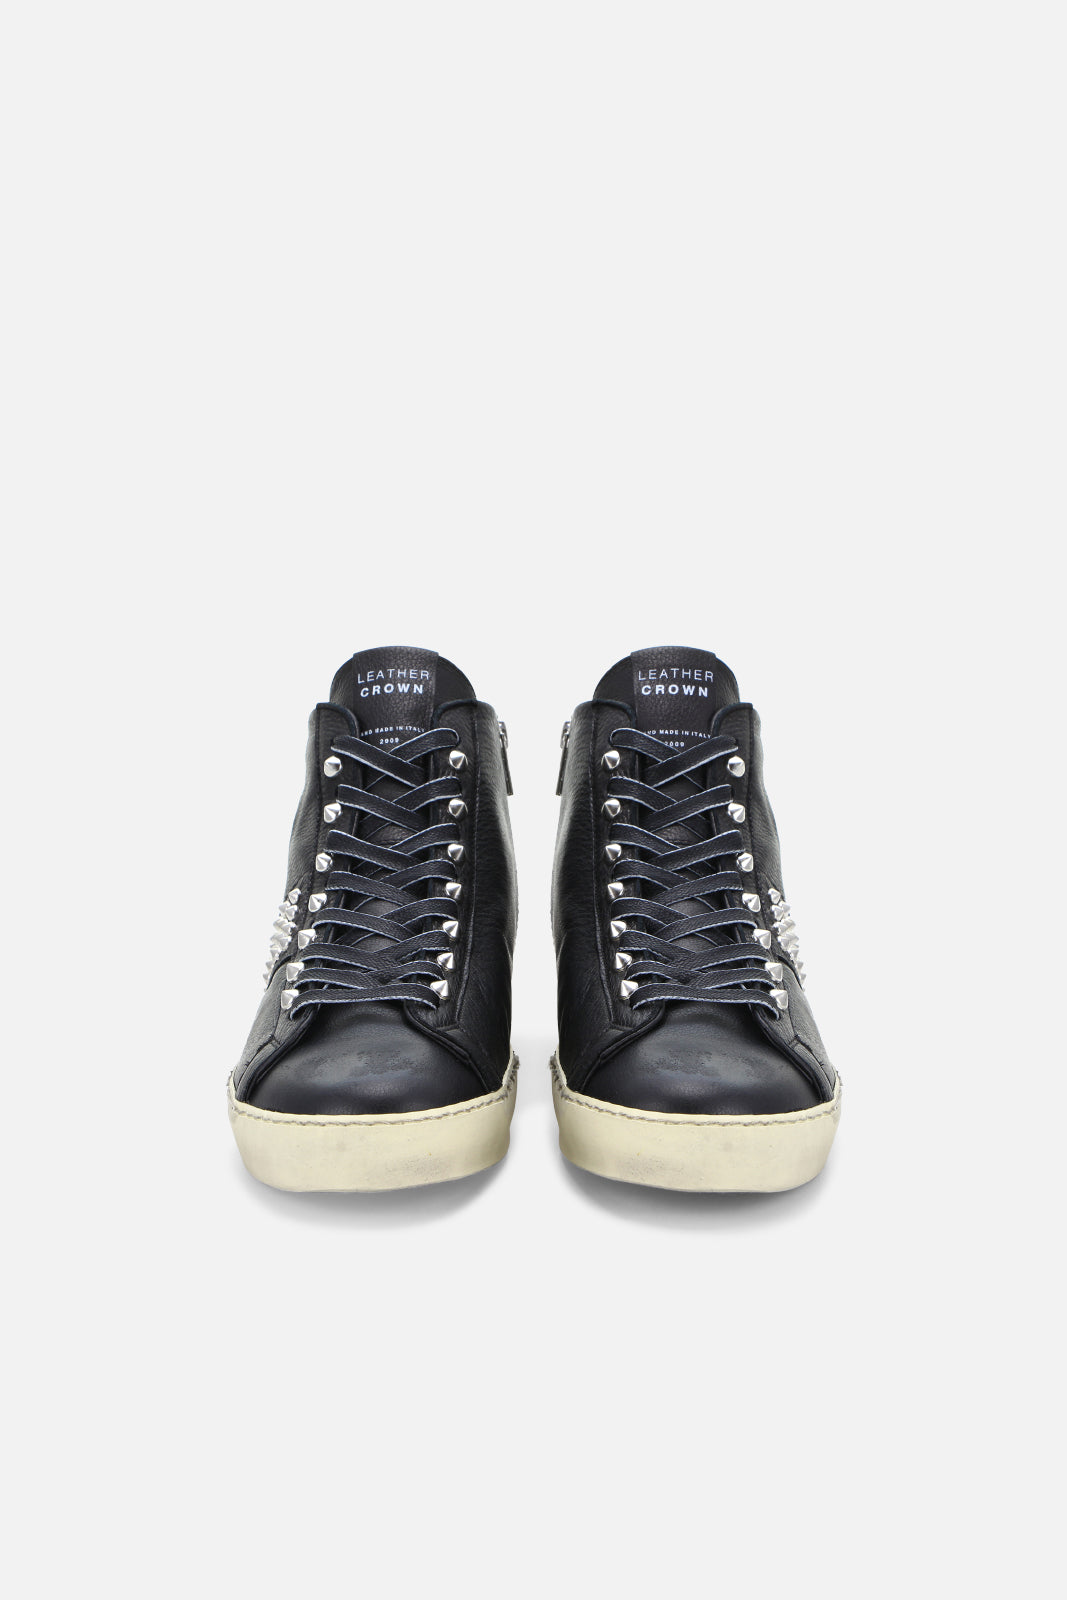 Iconic Stud High Top Sneaker – BANDIER